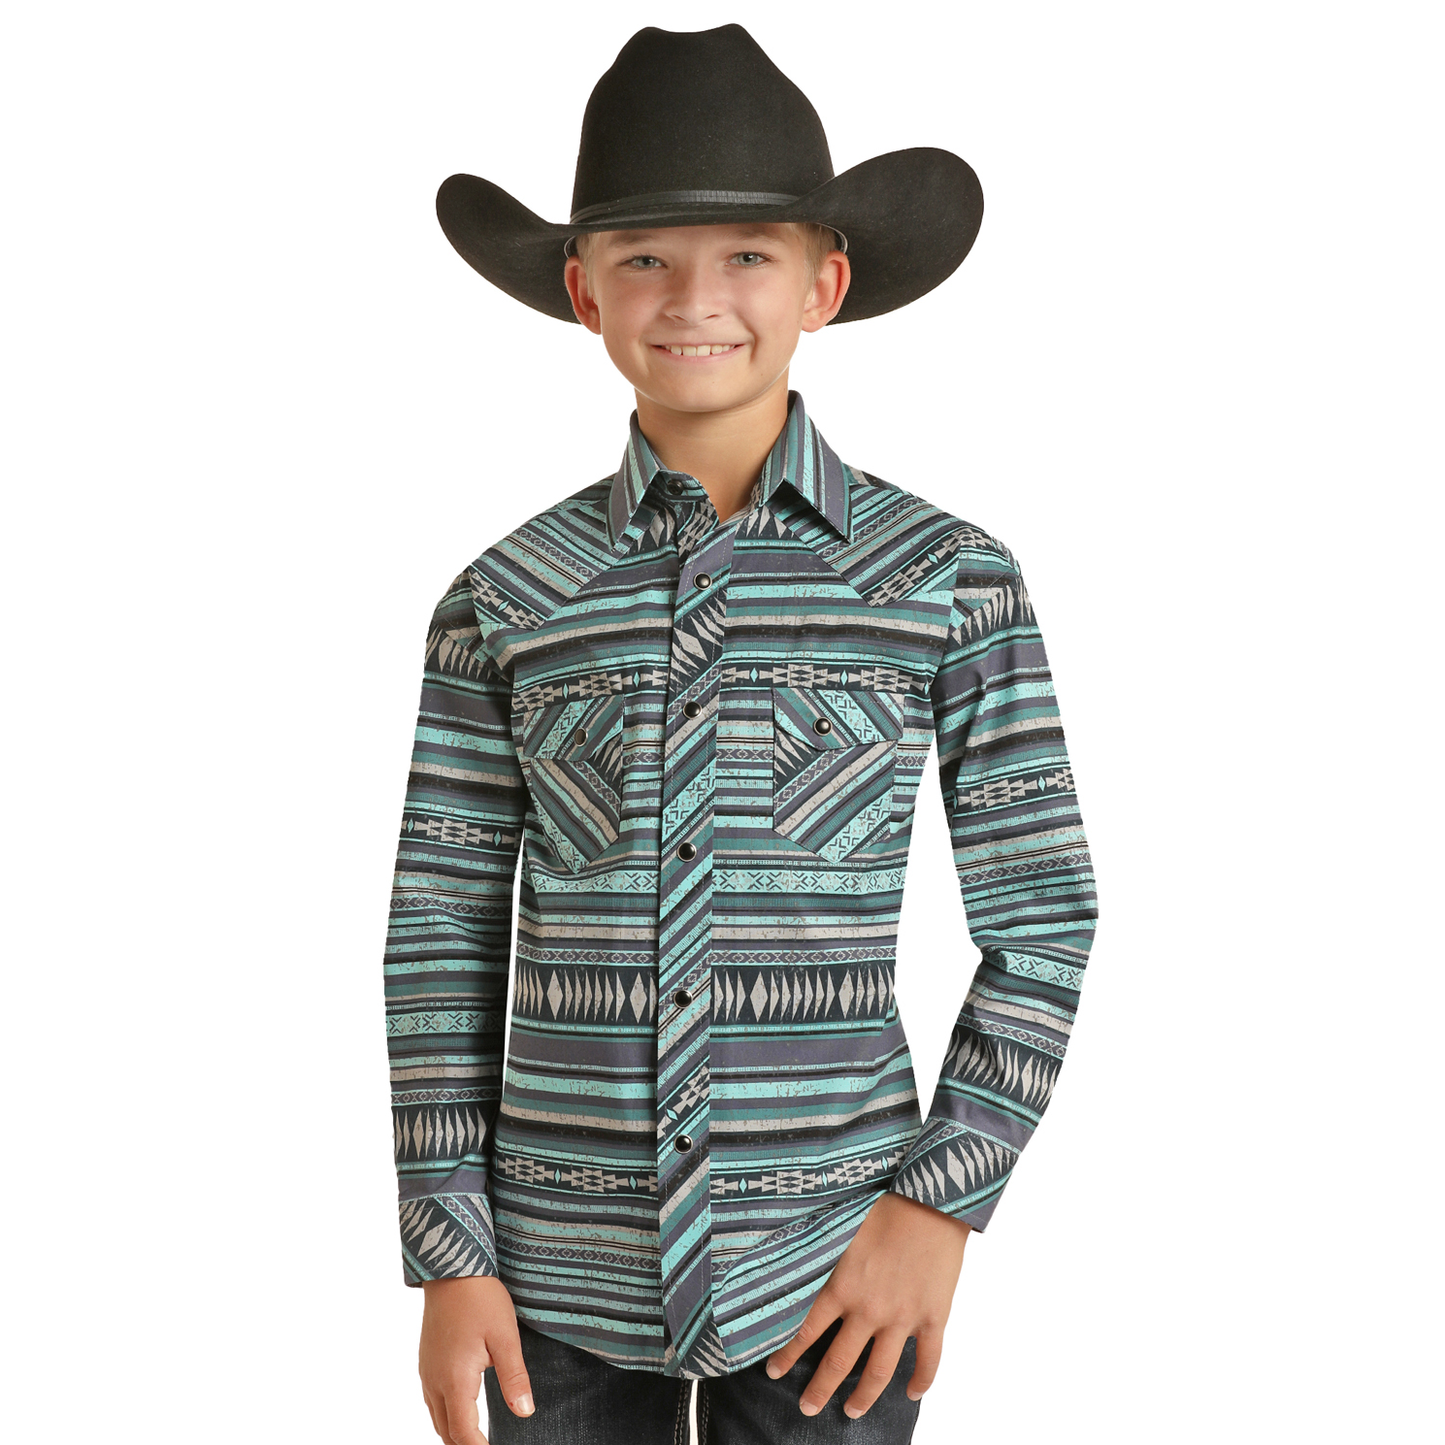 Rock & Roll® Youth Boy's Blue Aztec Striped Snap Up Shirt RRBSOSRZ1G-45